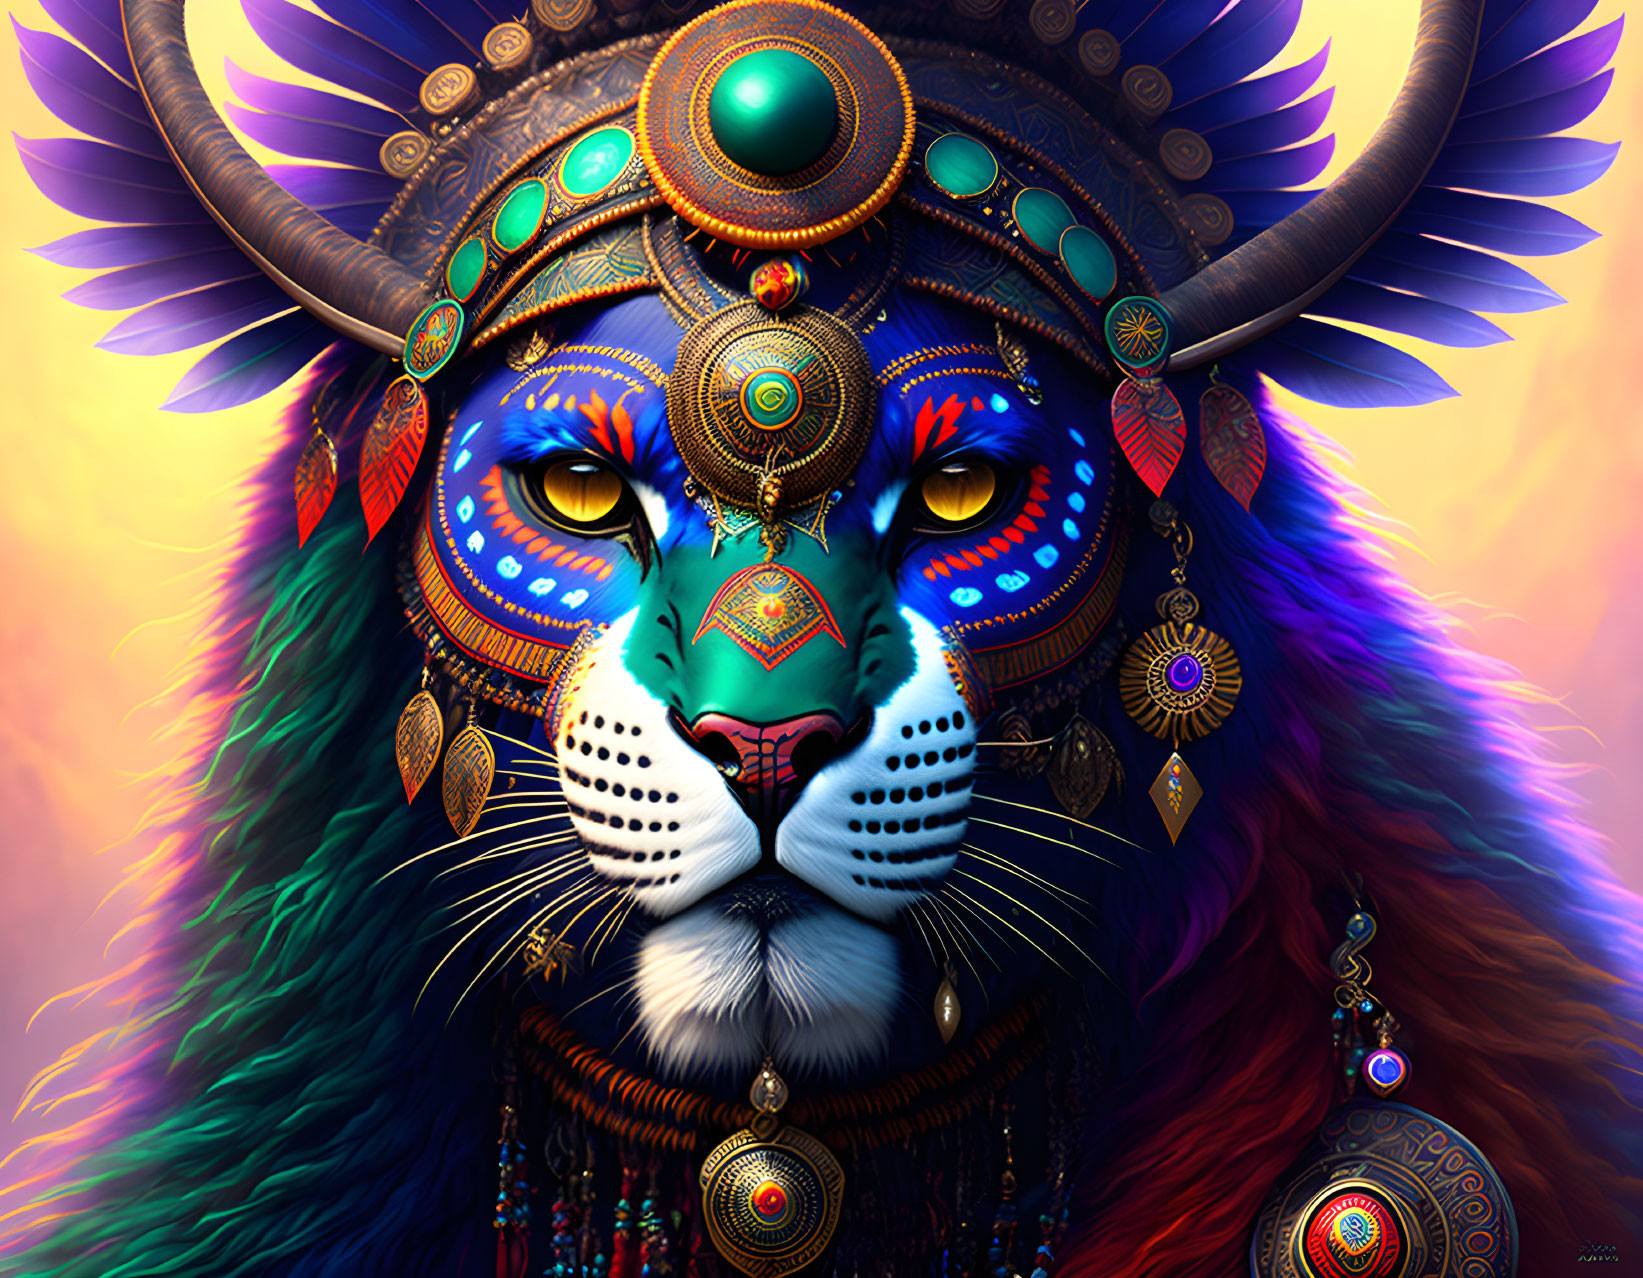 Colorful digital artwork of majestic lion with decorative face and tribal patterns